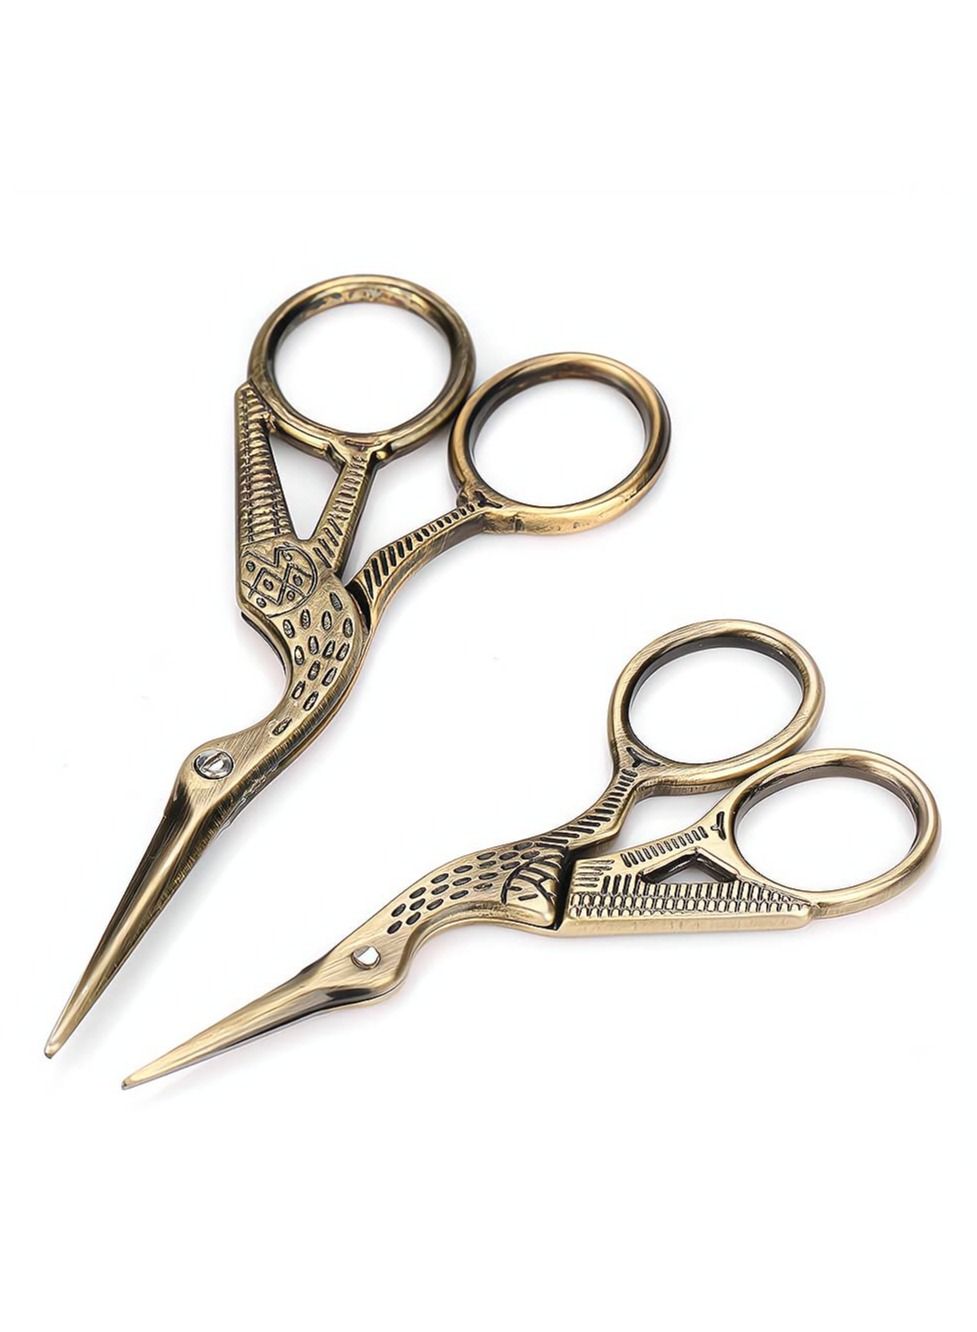 2PCS Vintage Stork Shape Sewing Scissors Stainless Steel Tailor Scissors  Sharp Sewing Shears for Embroidery, Sewing, Craft, Art Work & Everyday Use  